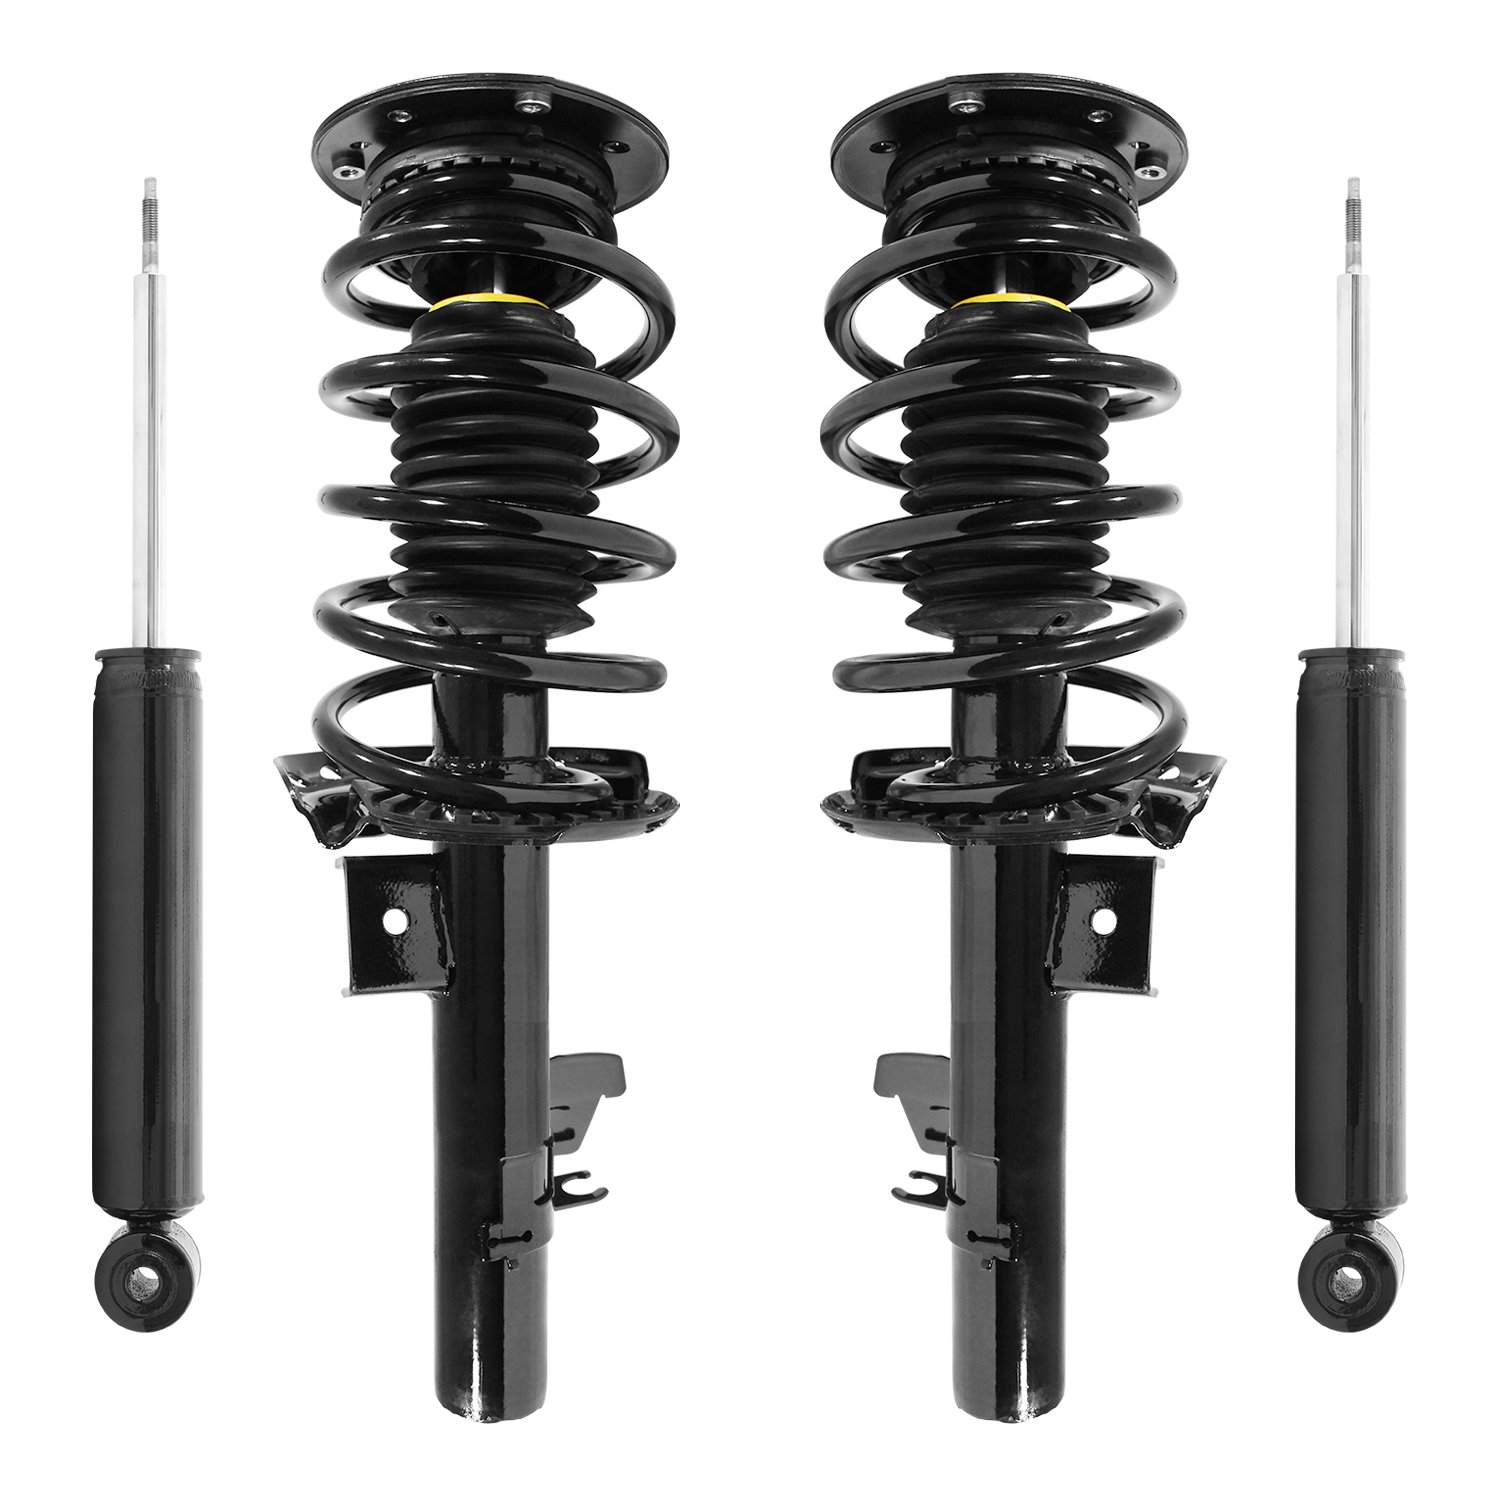 4-11493-259310-001 Front & Rear Suspension Strut & Coil Spring Assembly Fits Select Volvo S80